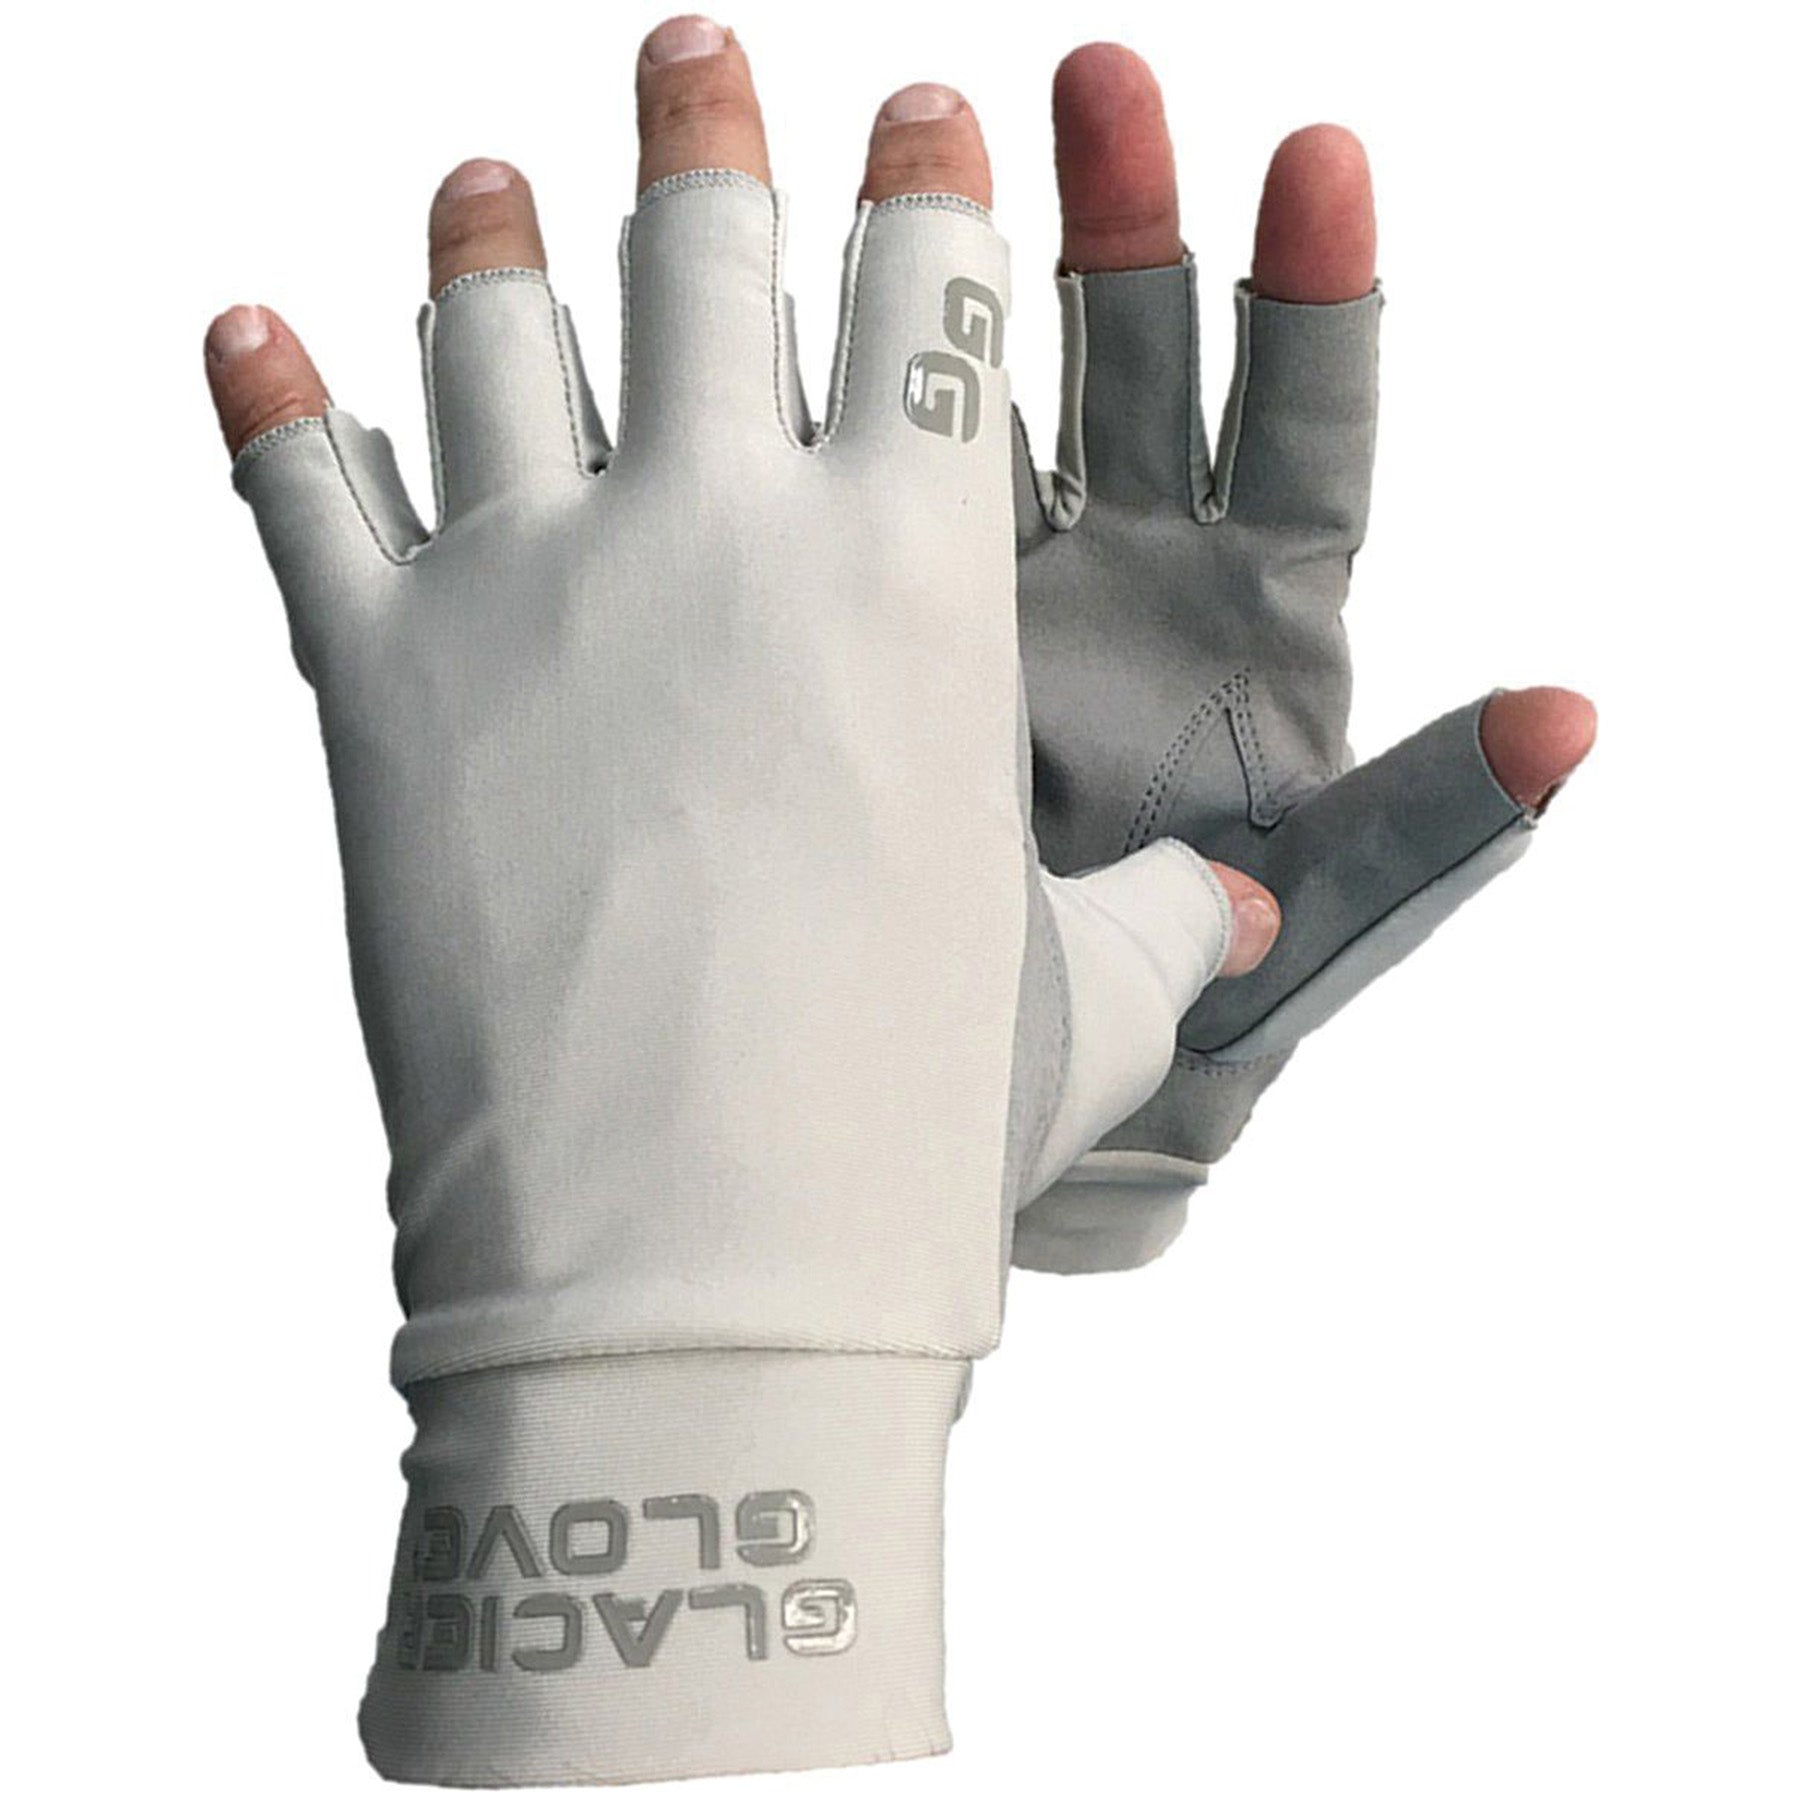 fingerless lycra sun glove with synthetic leather palm, grey